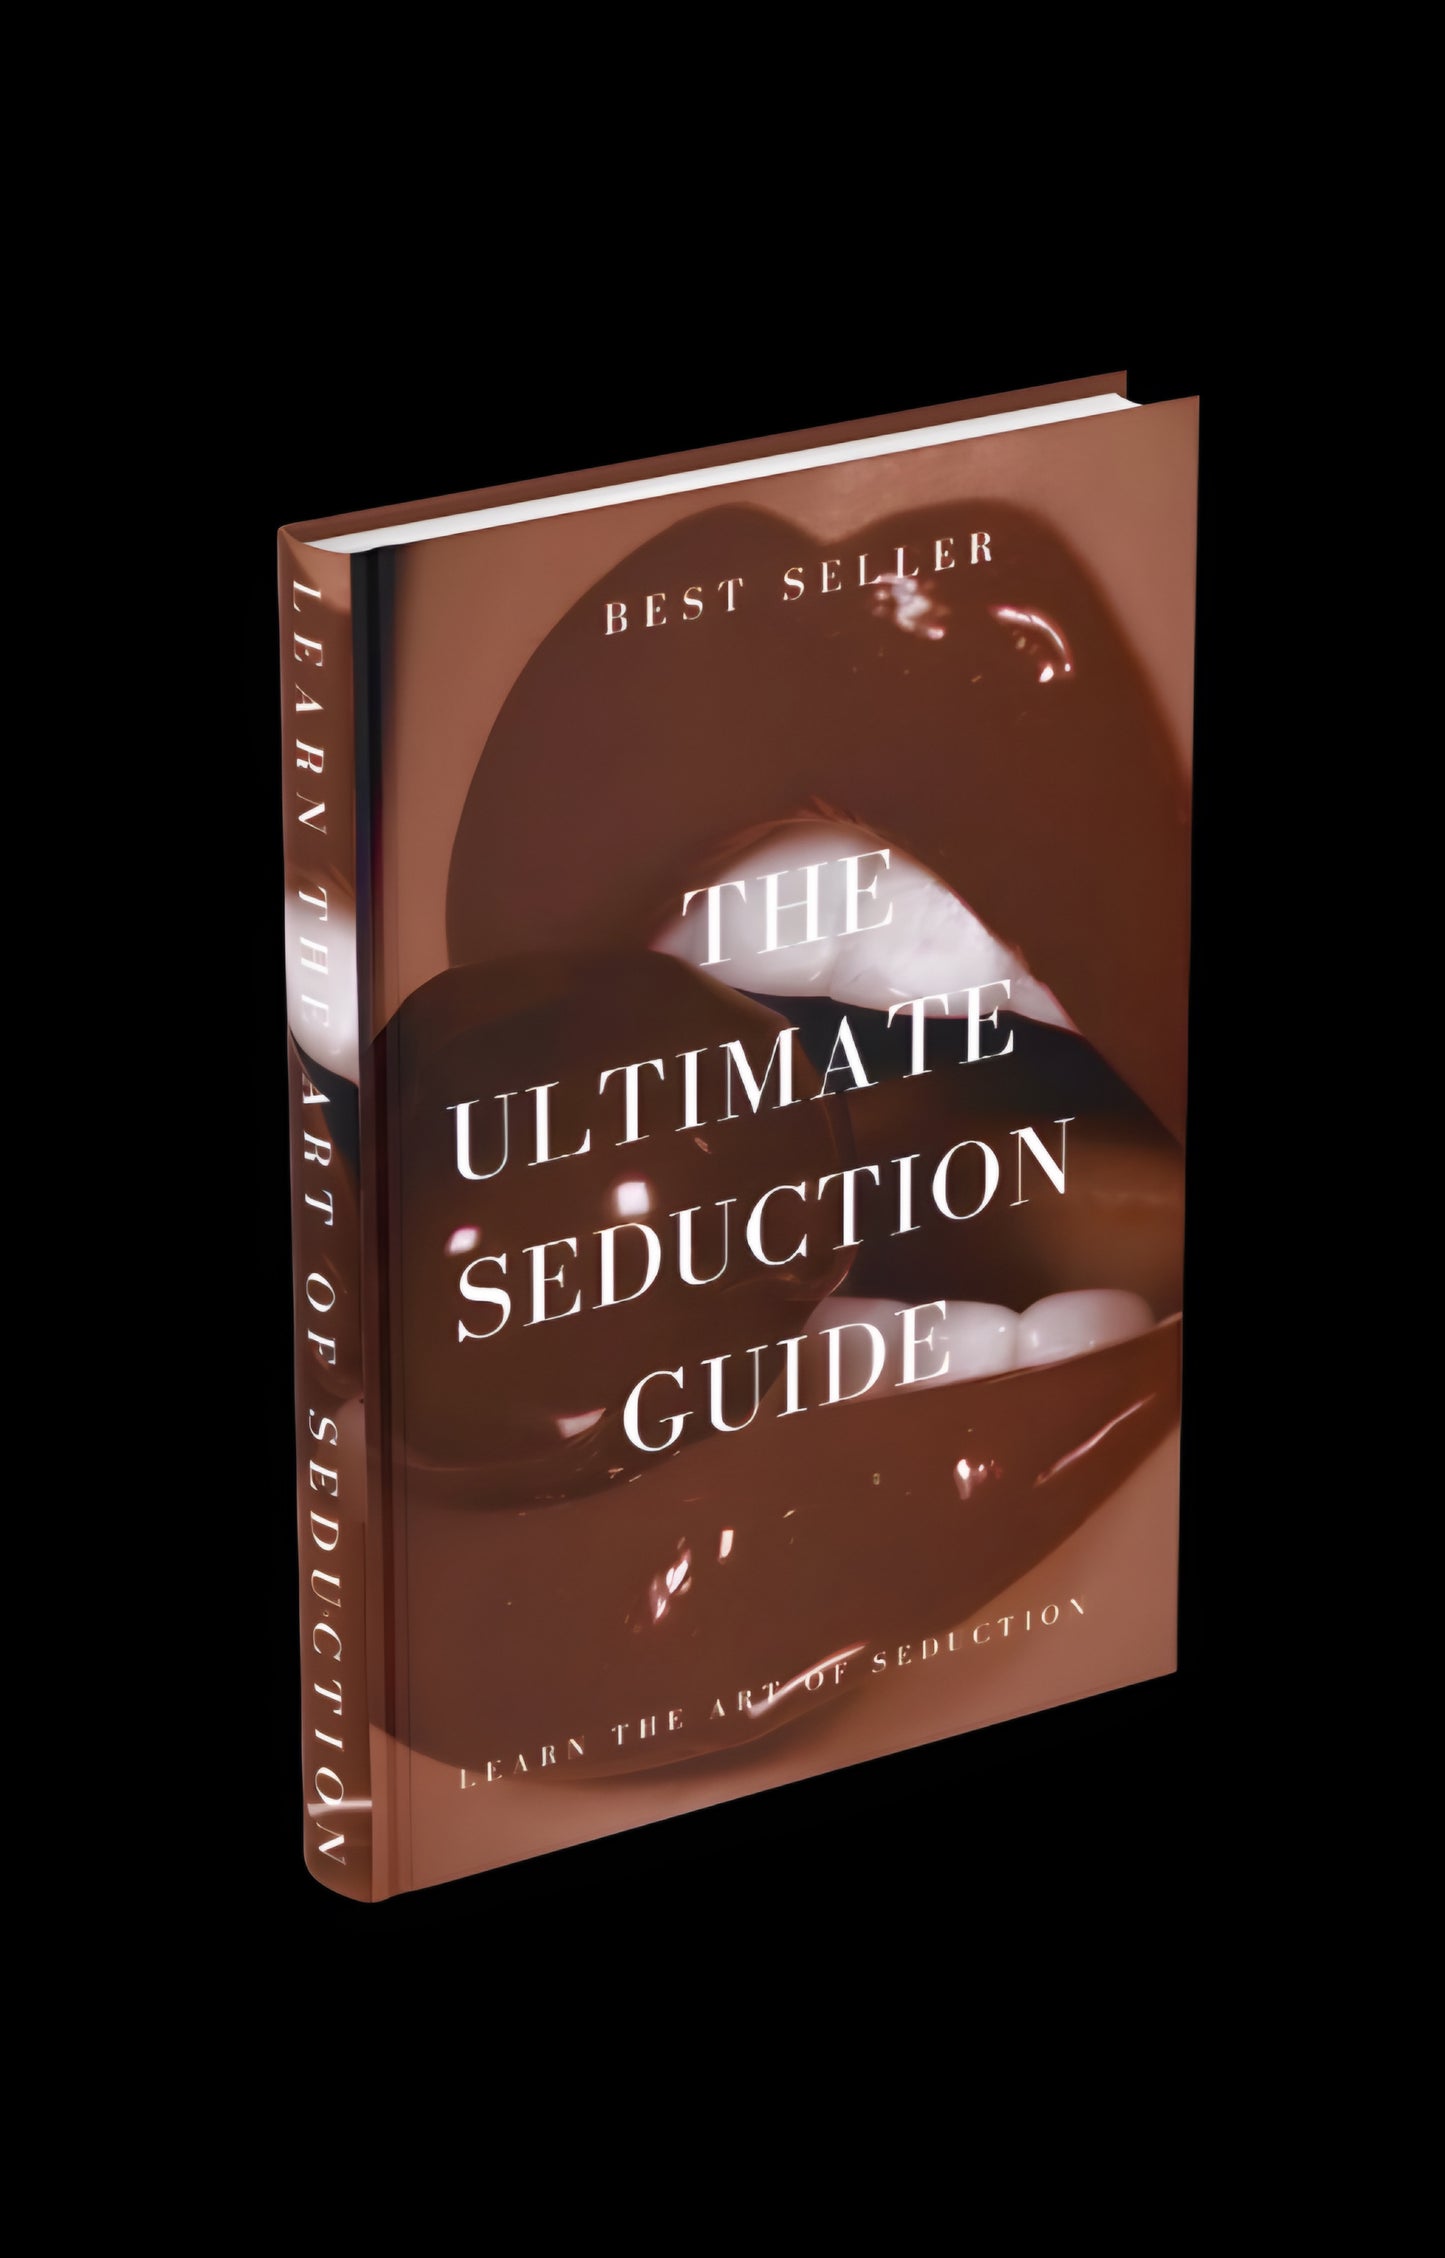 THE ULTIMATE SEDUCTION GUIDE PRO - Ebook (Instant Download)